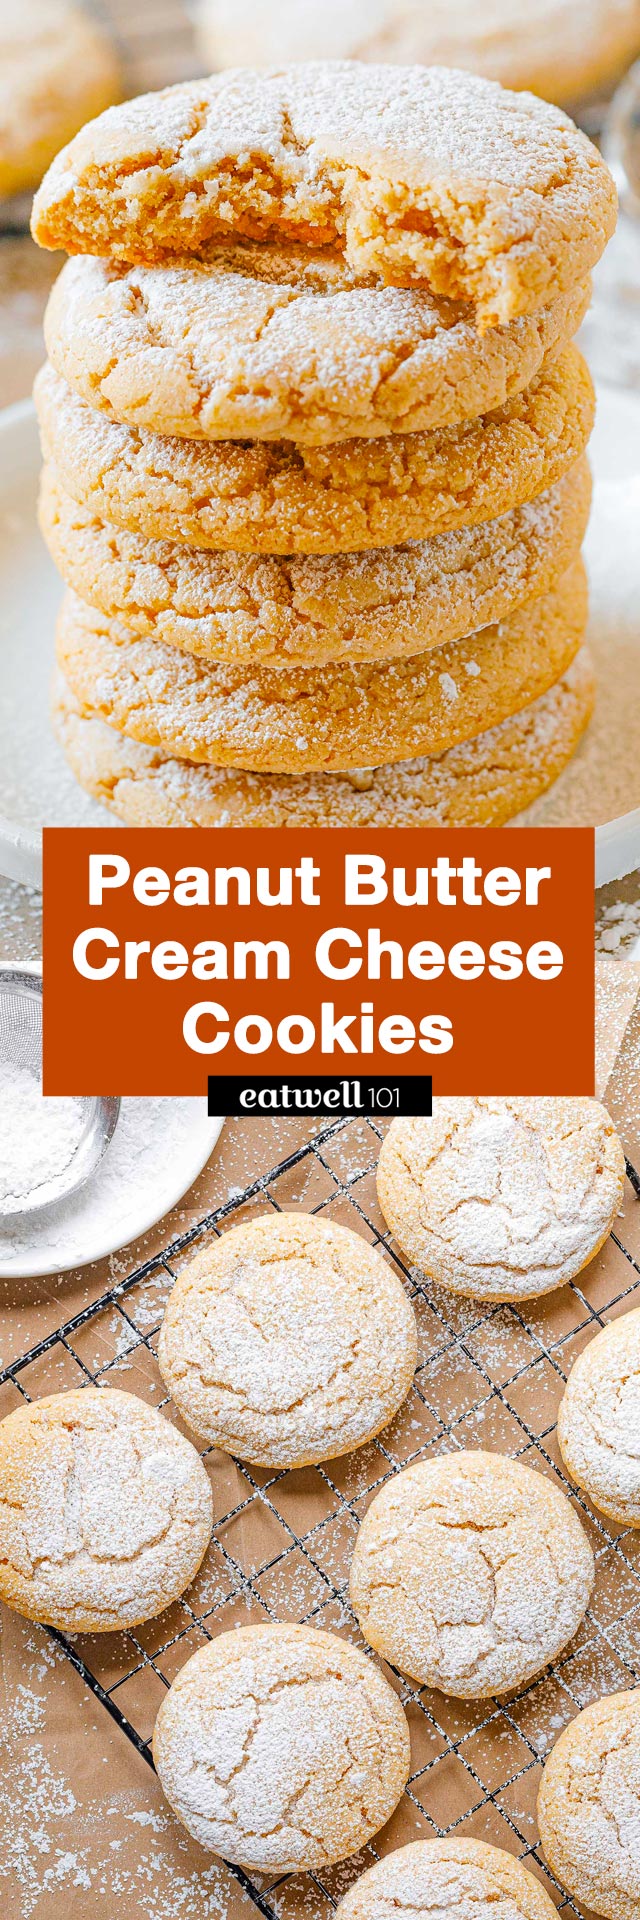 Peanut Butter Cream Cheese Cookies - #cookies #recipe #eatwell101 - These peanut butter cream cheese cookies are crunchy on the outside, soft on the inside, and they literally melt in your mouth!